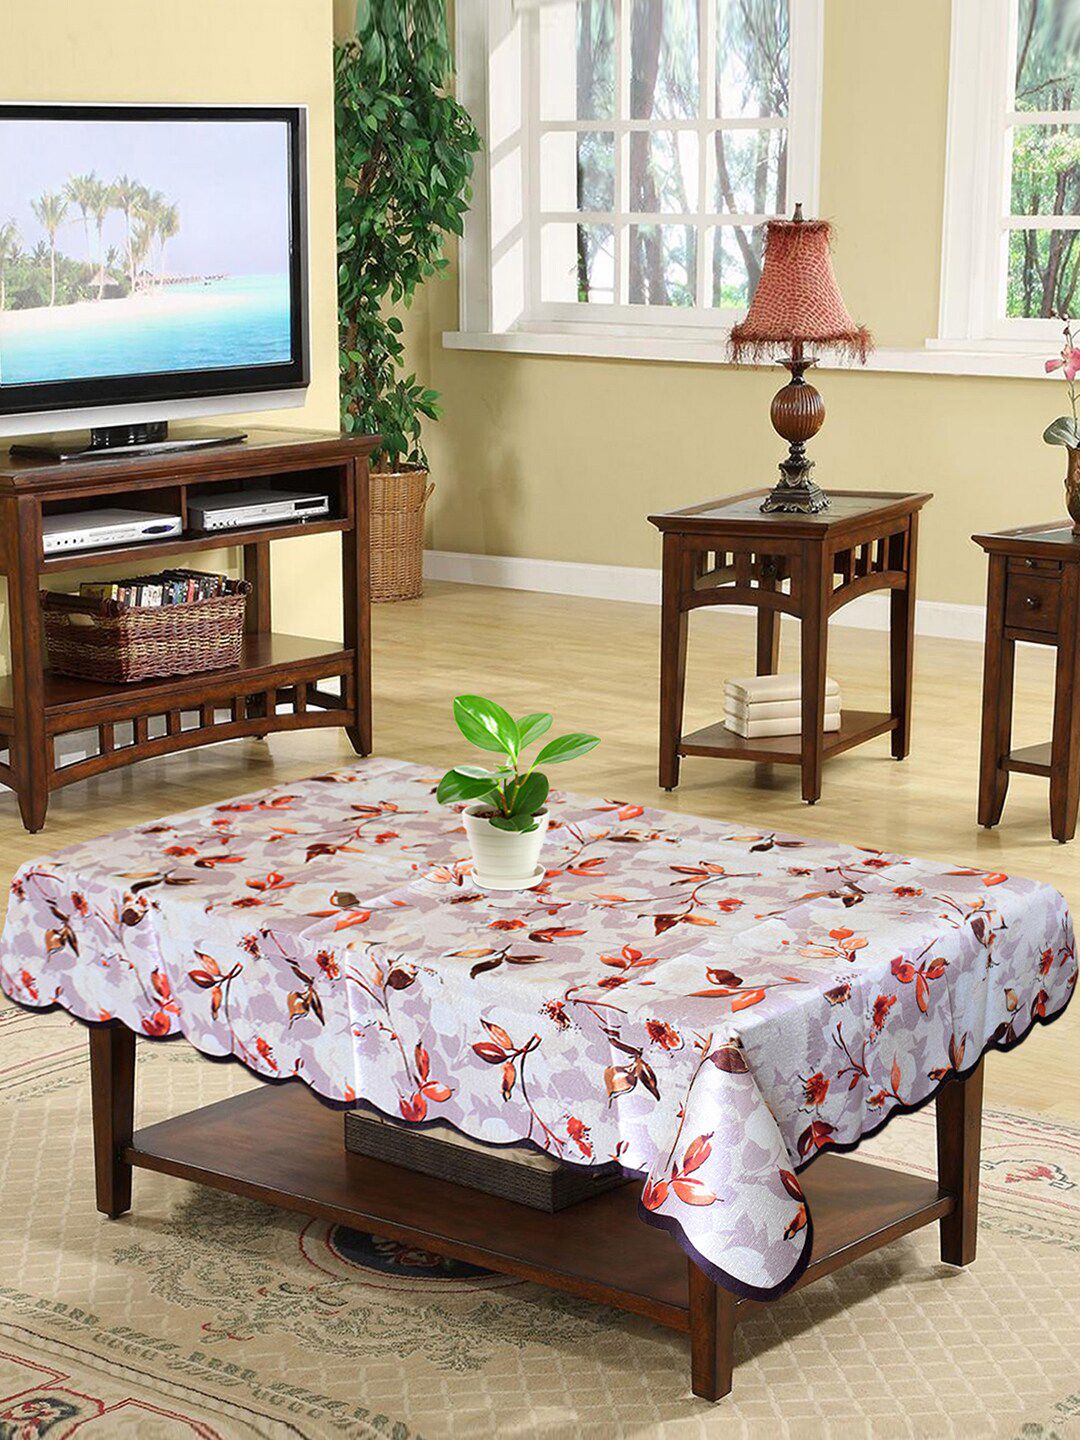 Kuber Industries Cream Printed Soft Cotton 4 Seater Table Cover Price in India